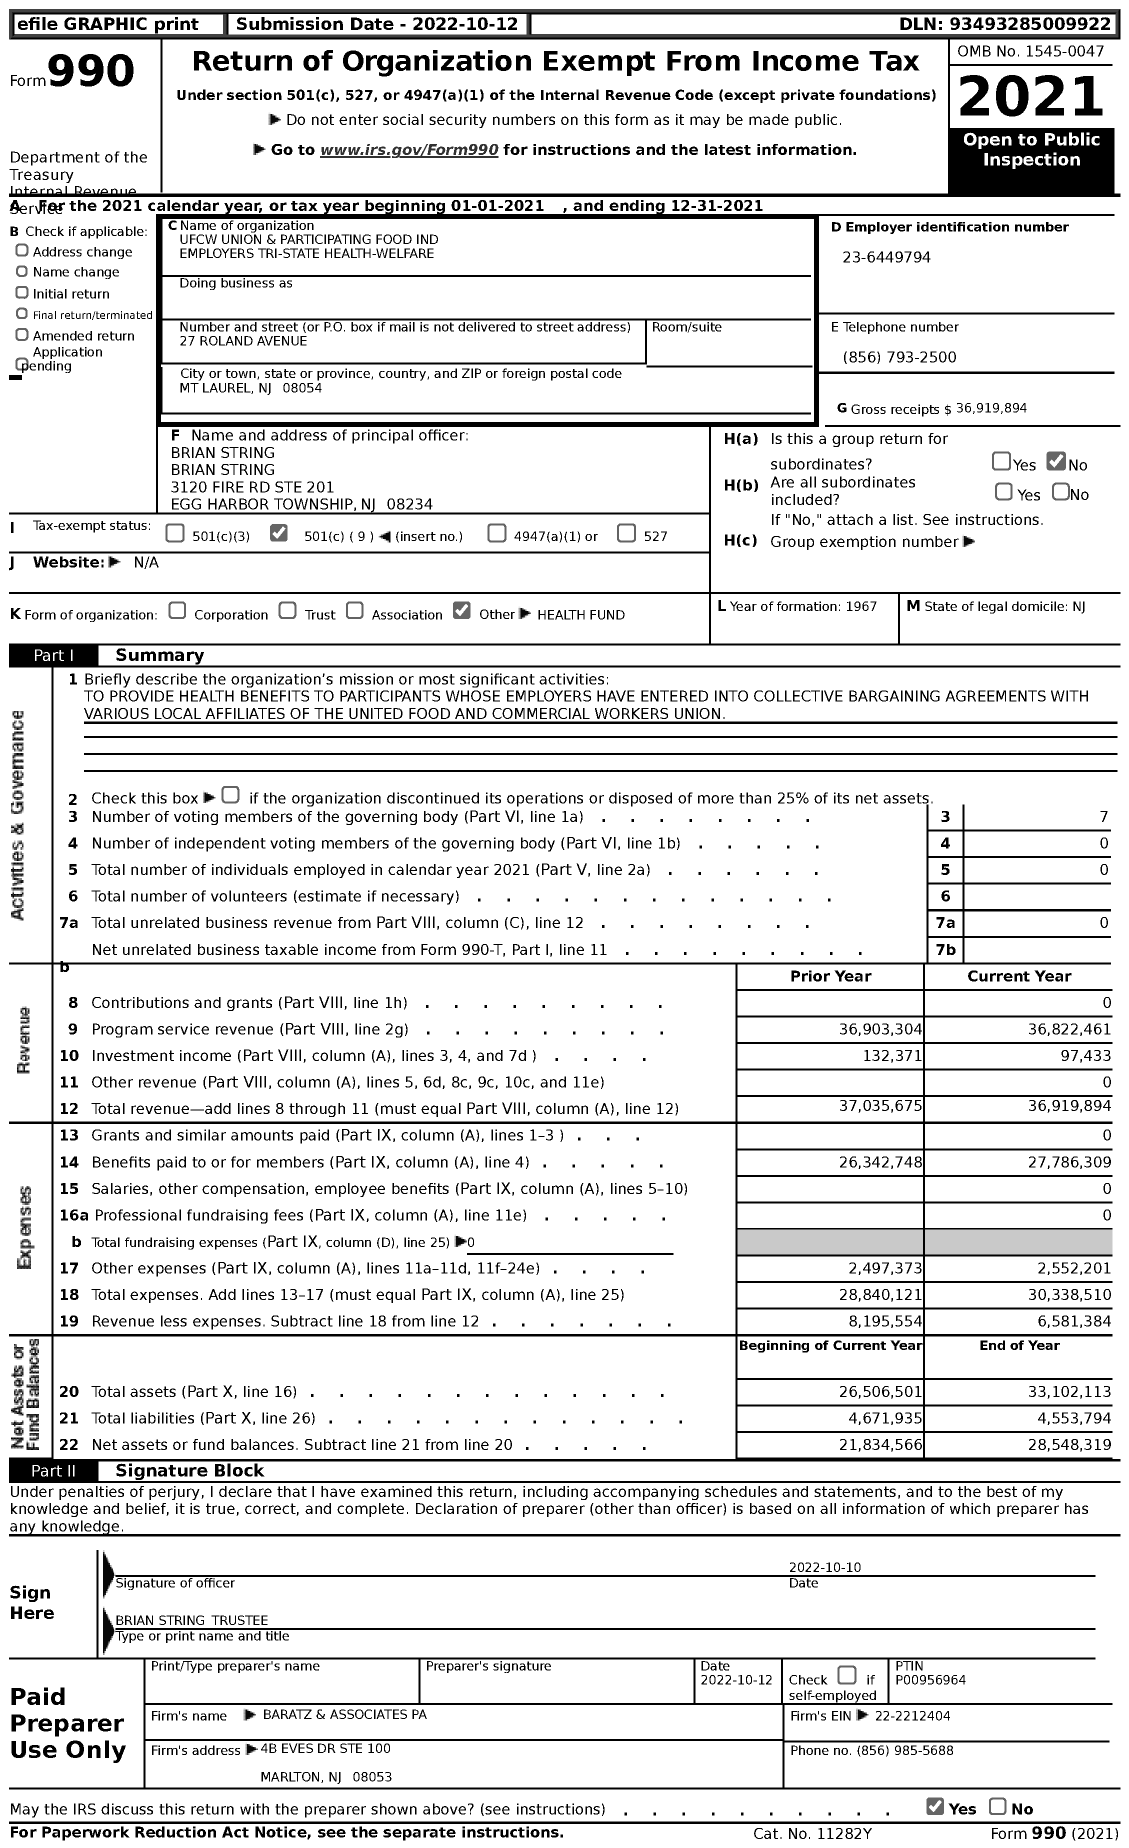 Image of first page of 2021 Form 990 for Ufcw Union and Participating Food Ind Employers Tri-State Health-Welfare